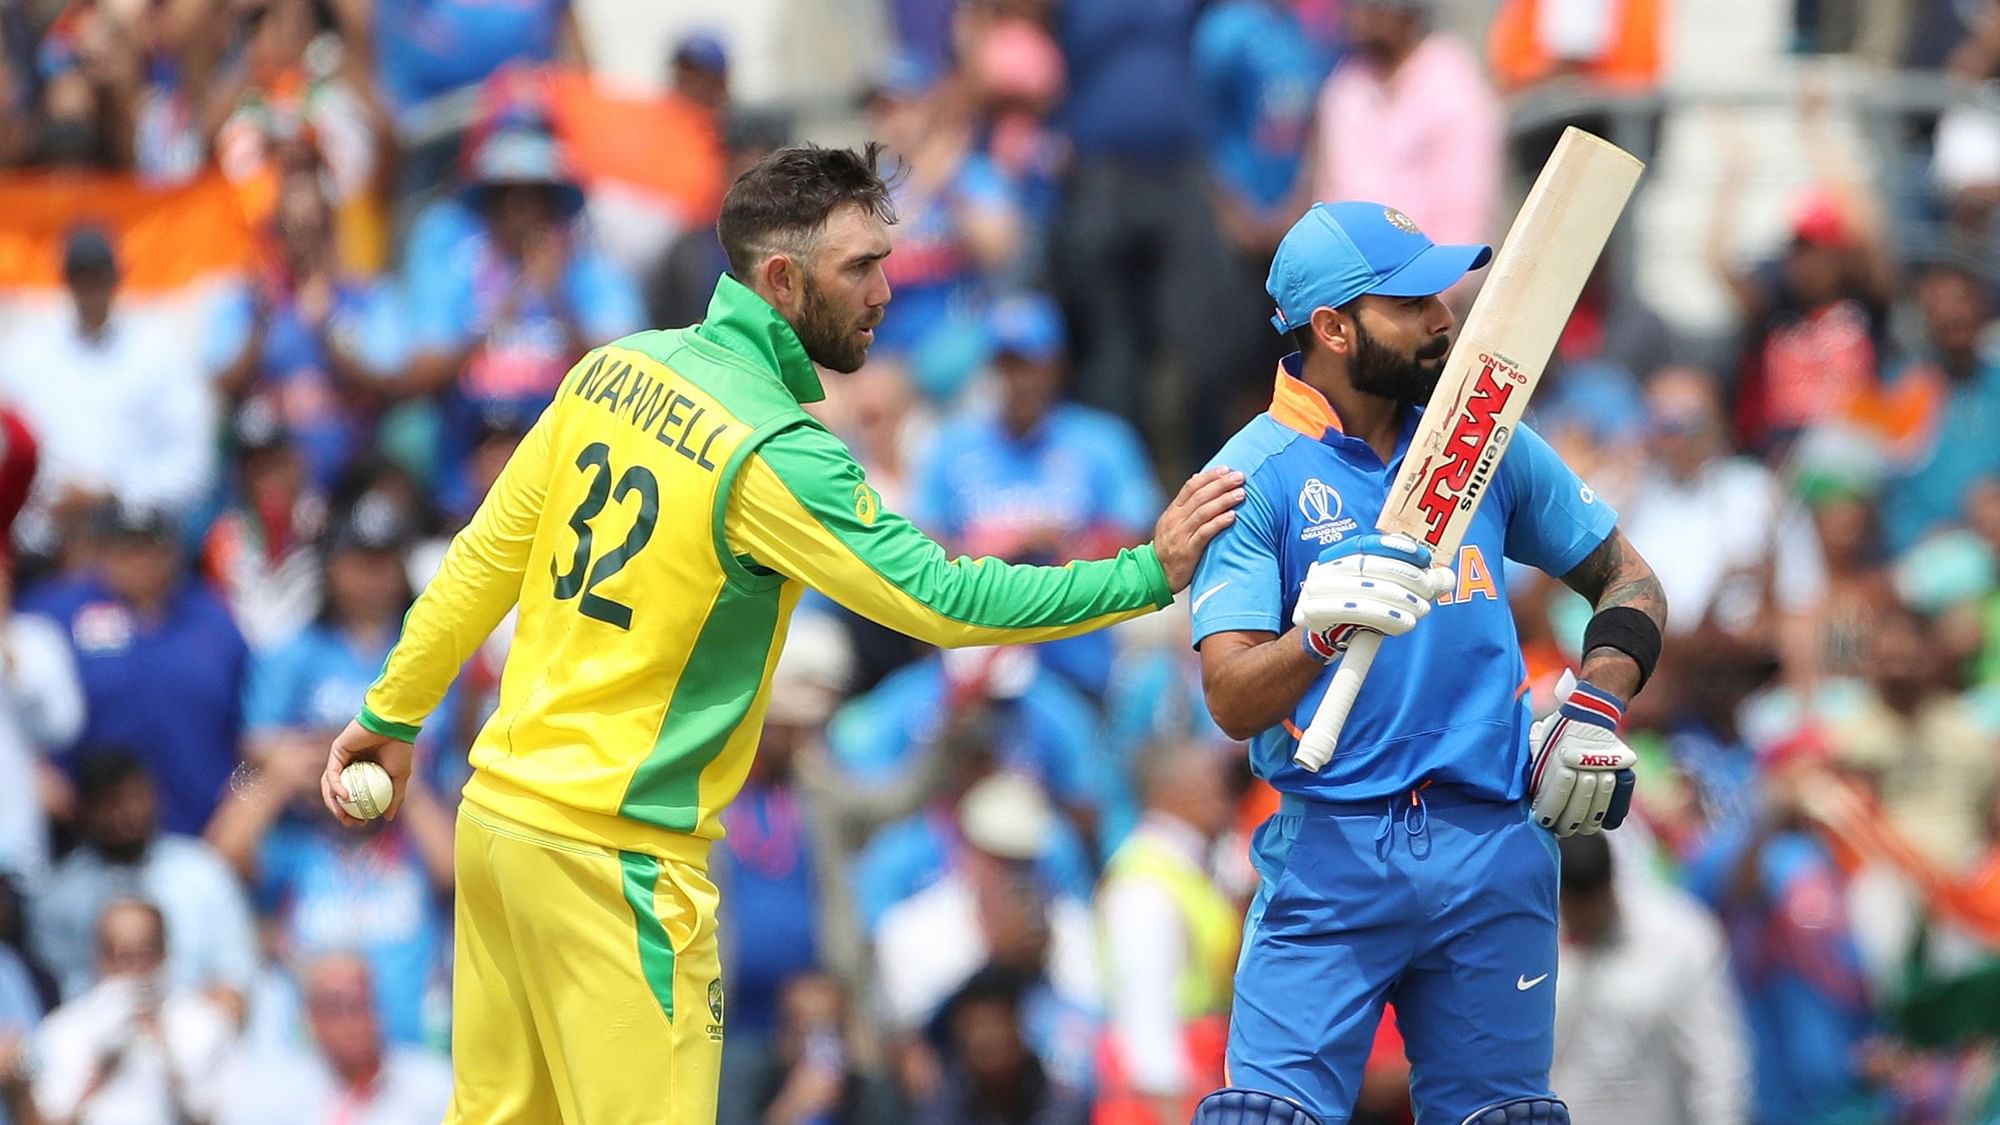 India's captain Virat Kohli, right, celebrates scoring fifty runs as Australia's Glenn Maxwell asks him to move on the other side of wicket to let him bowl during the Cricket World Cup match between Australia and India at The Oval in London, Sunday, June 9, 2019. 